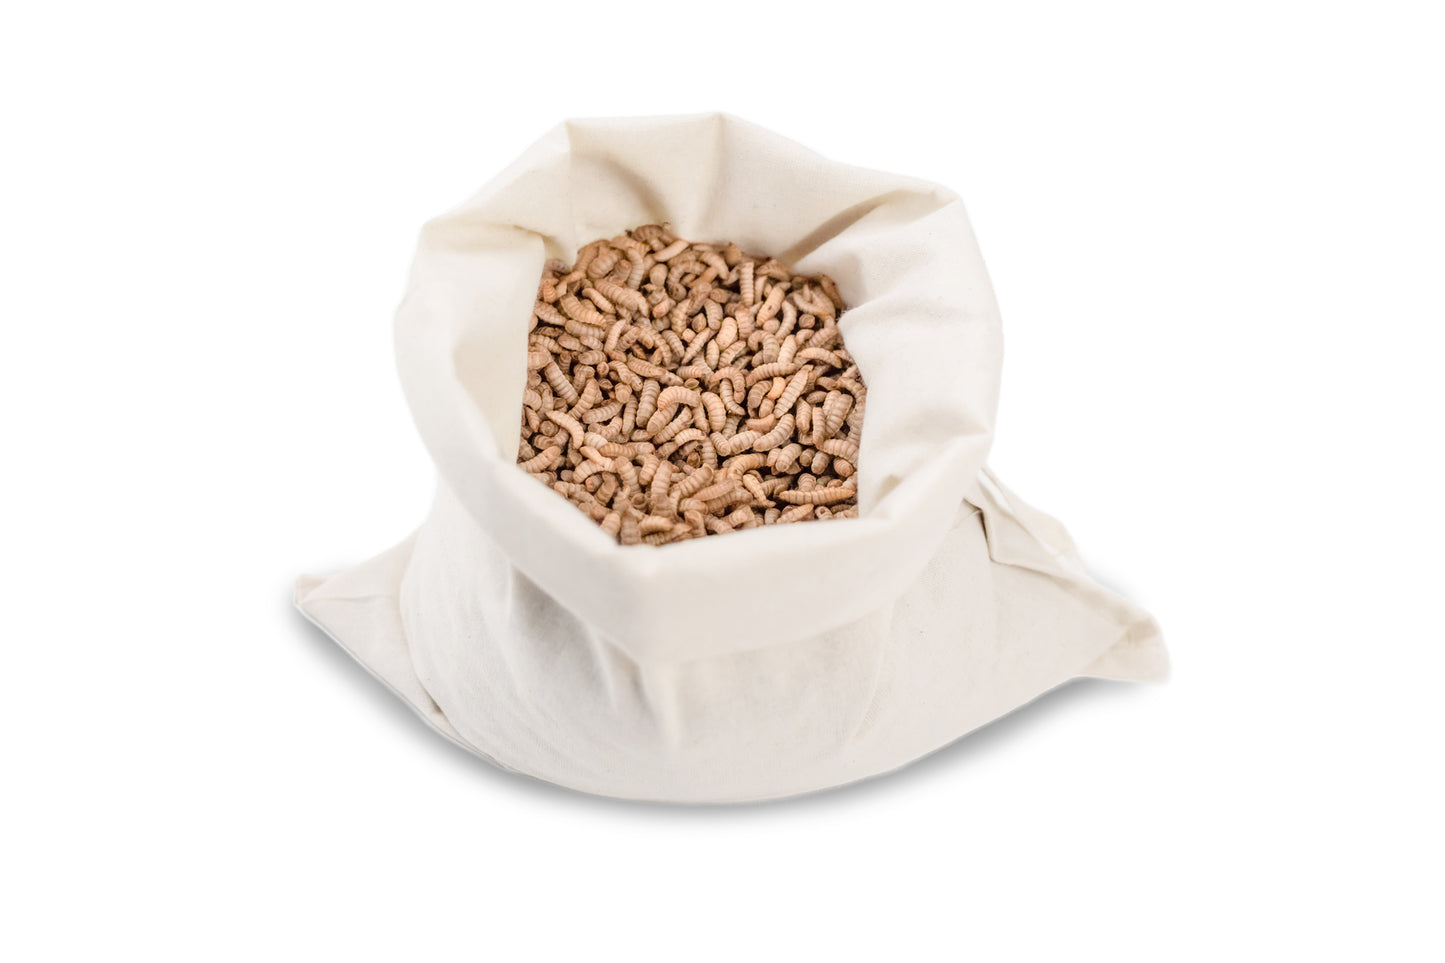 Live BSF Larvae 1kg - Free Shipping